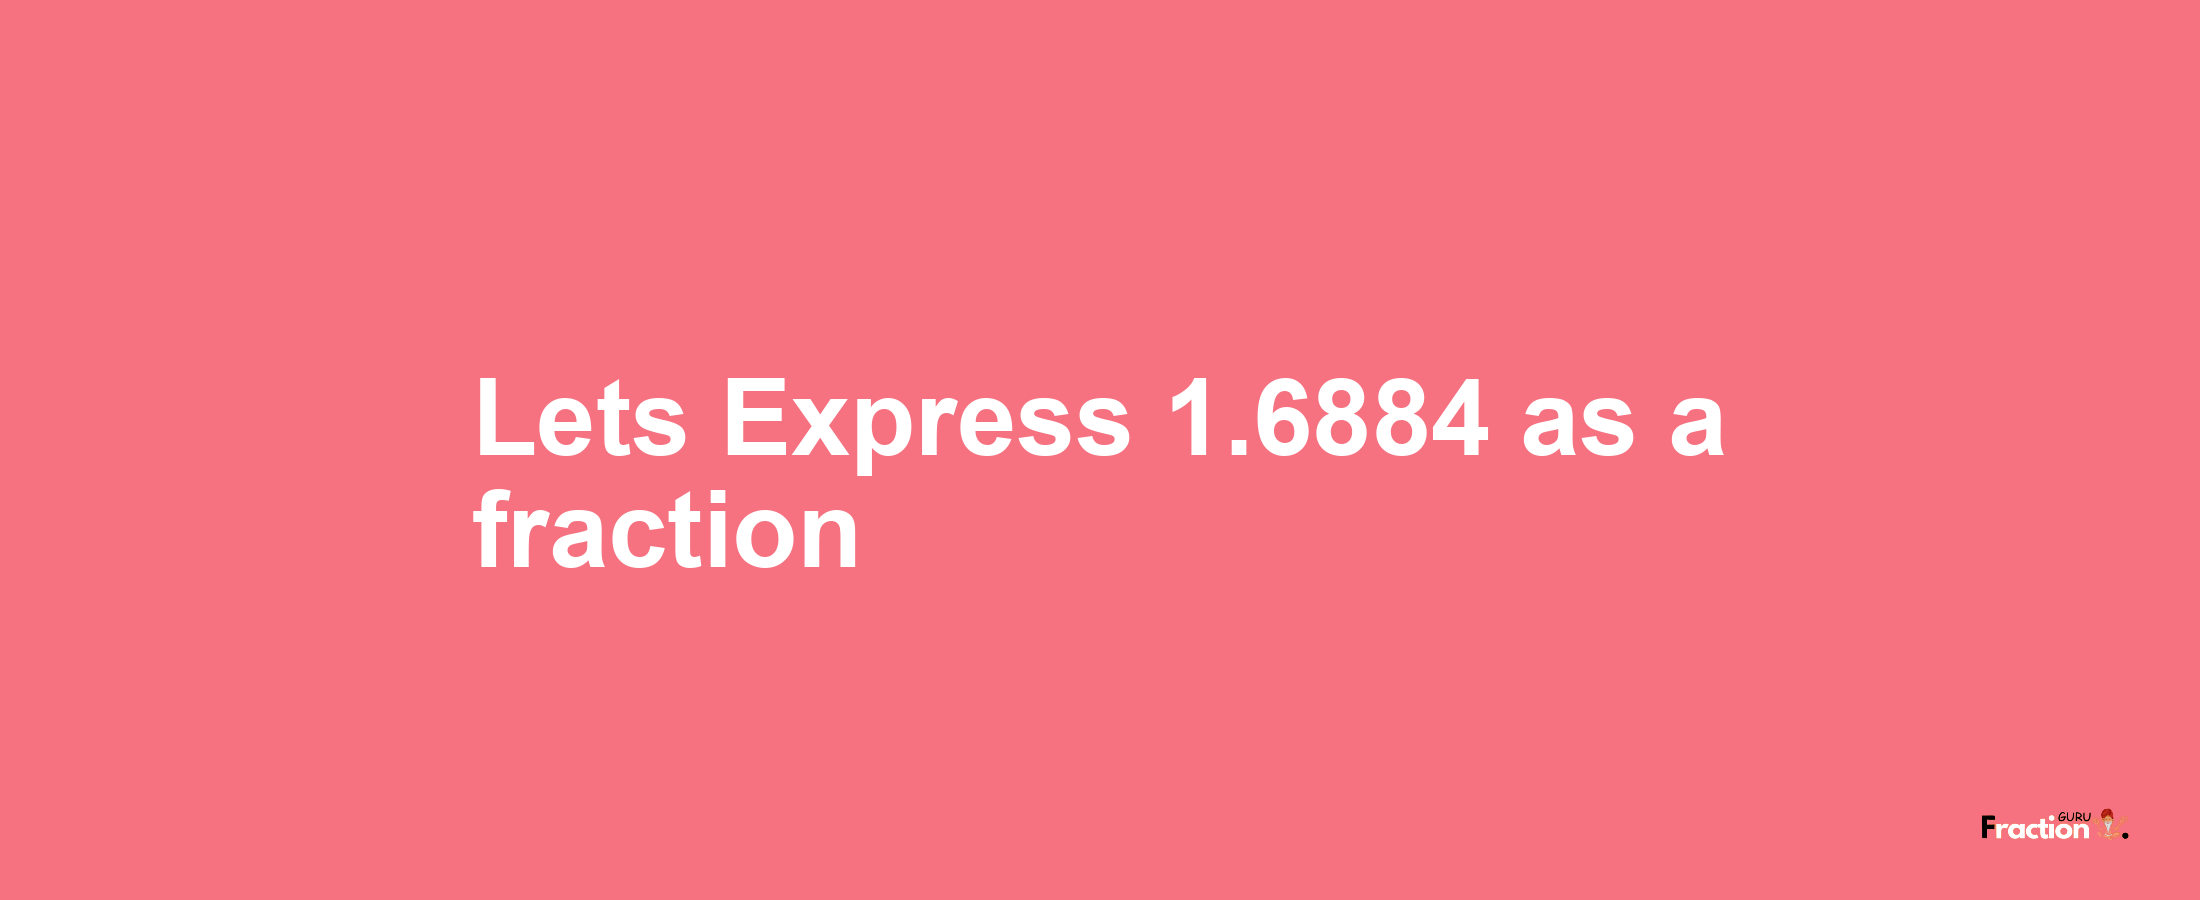 Lets Express 1.6884 as afraction